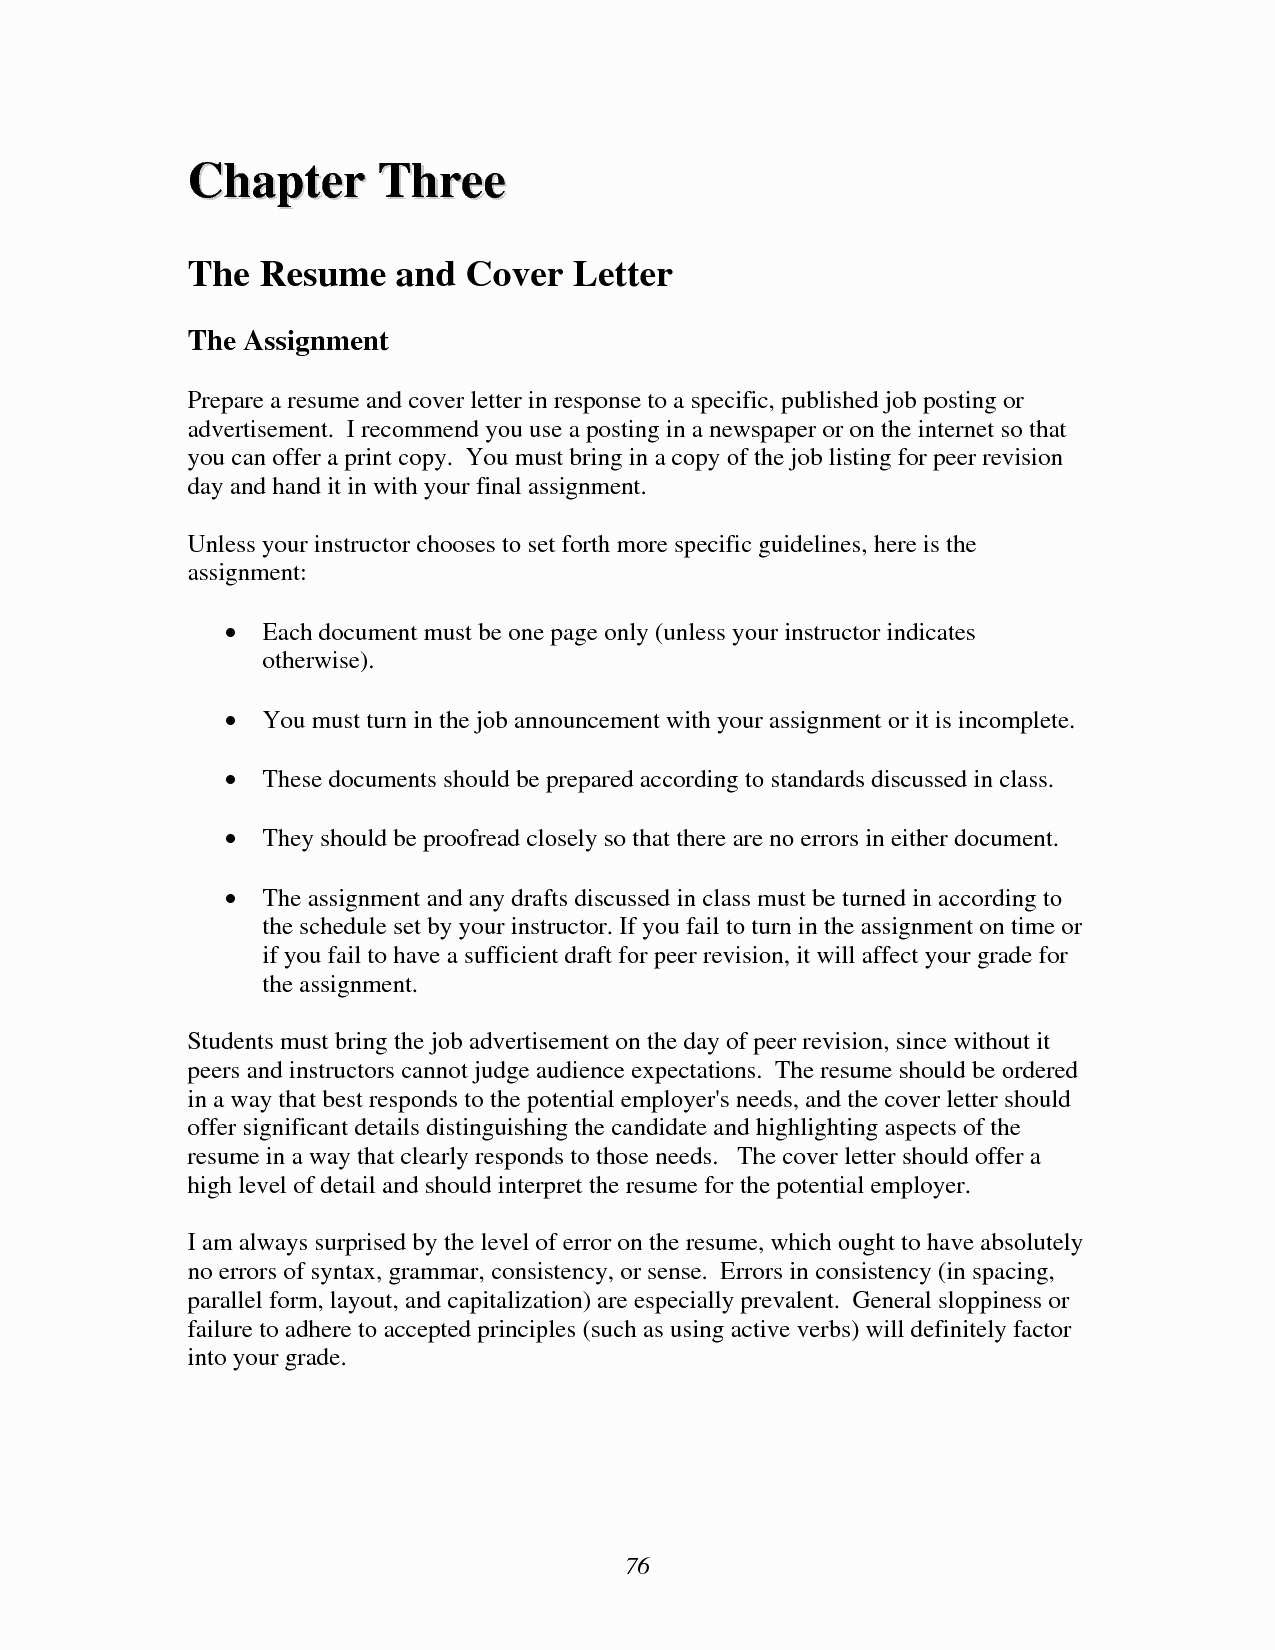 Cover Letter Template No Experience - Sample Cover Letter for Career Change with No Experience Valid Job